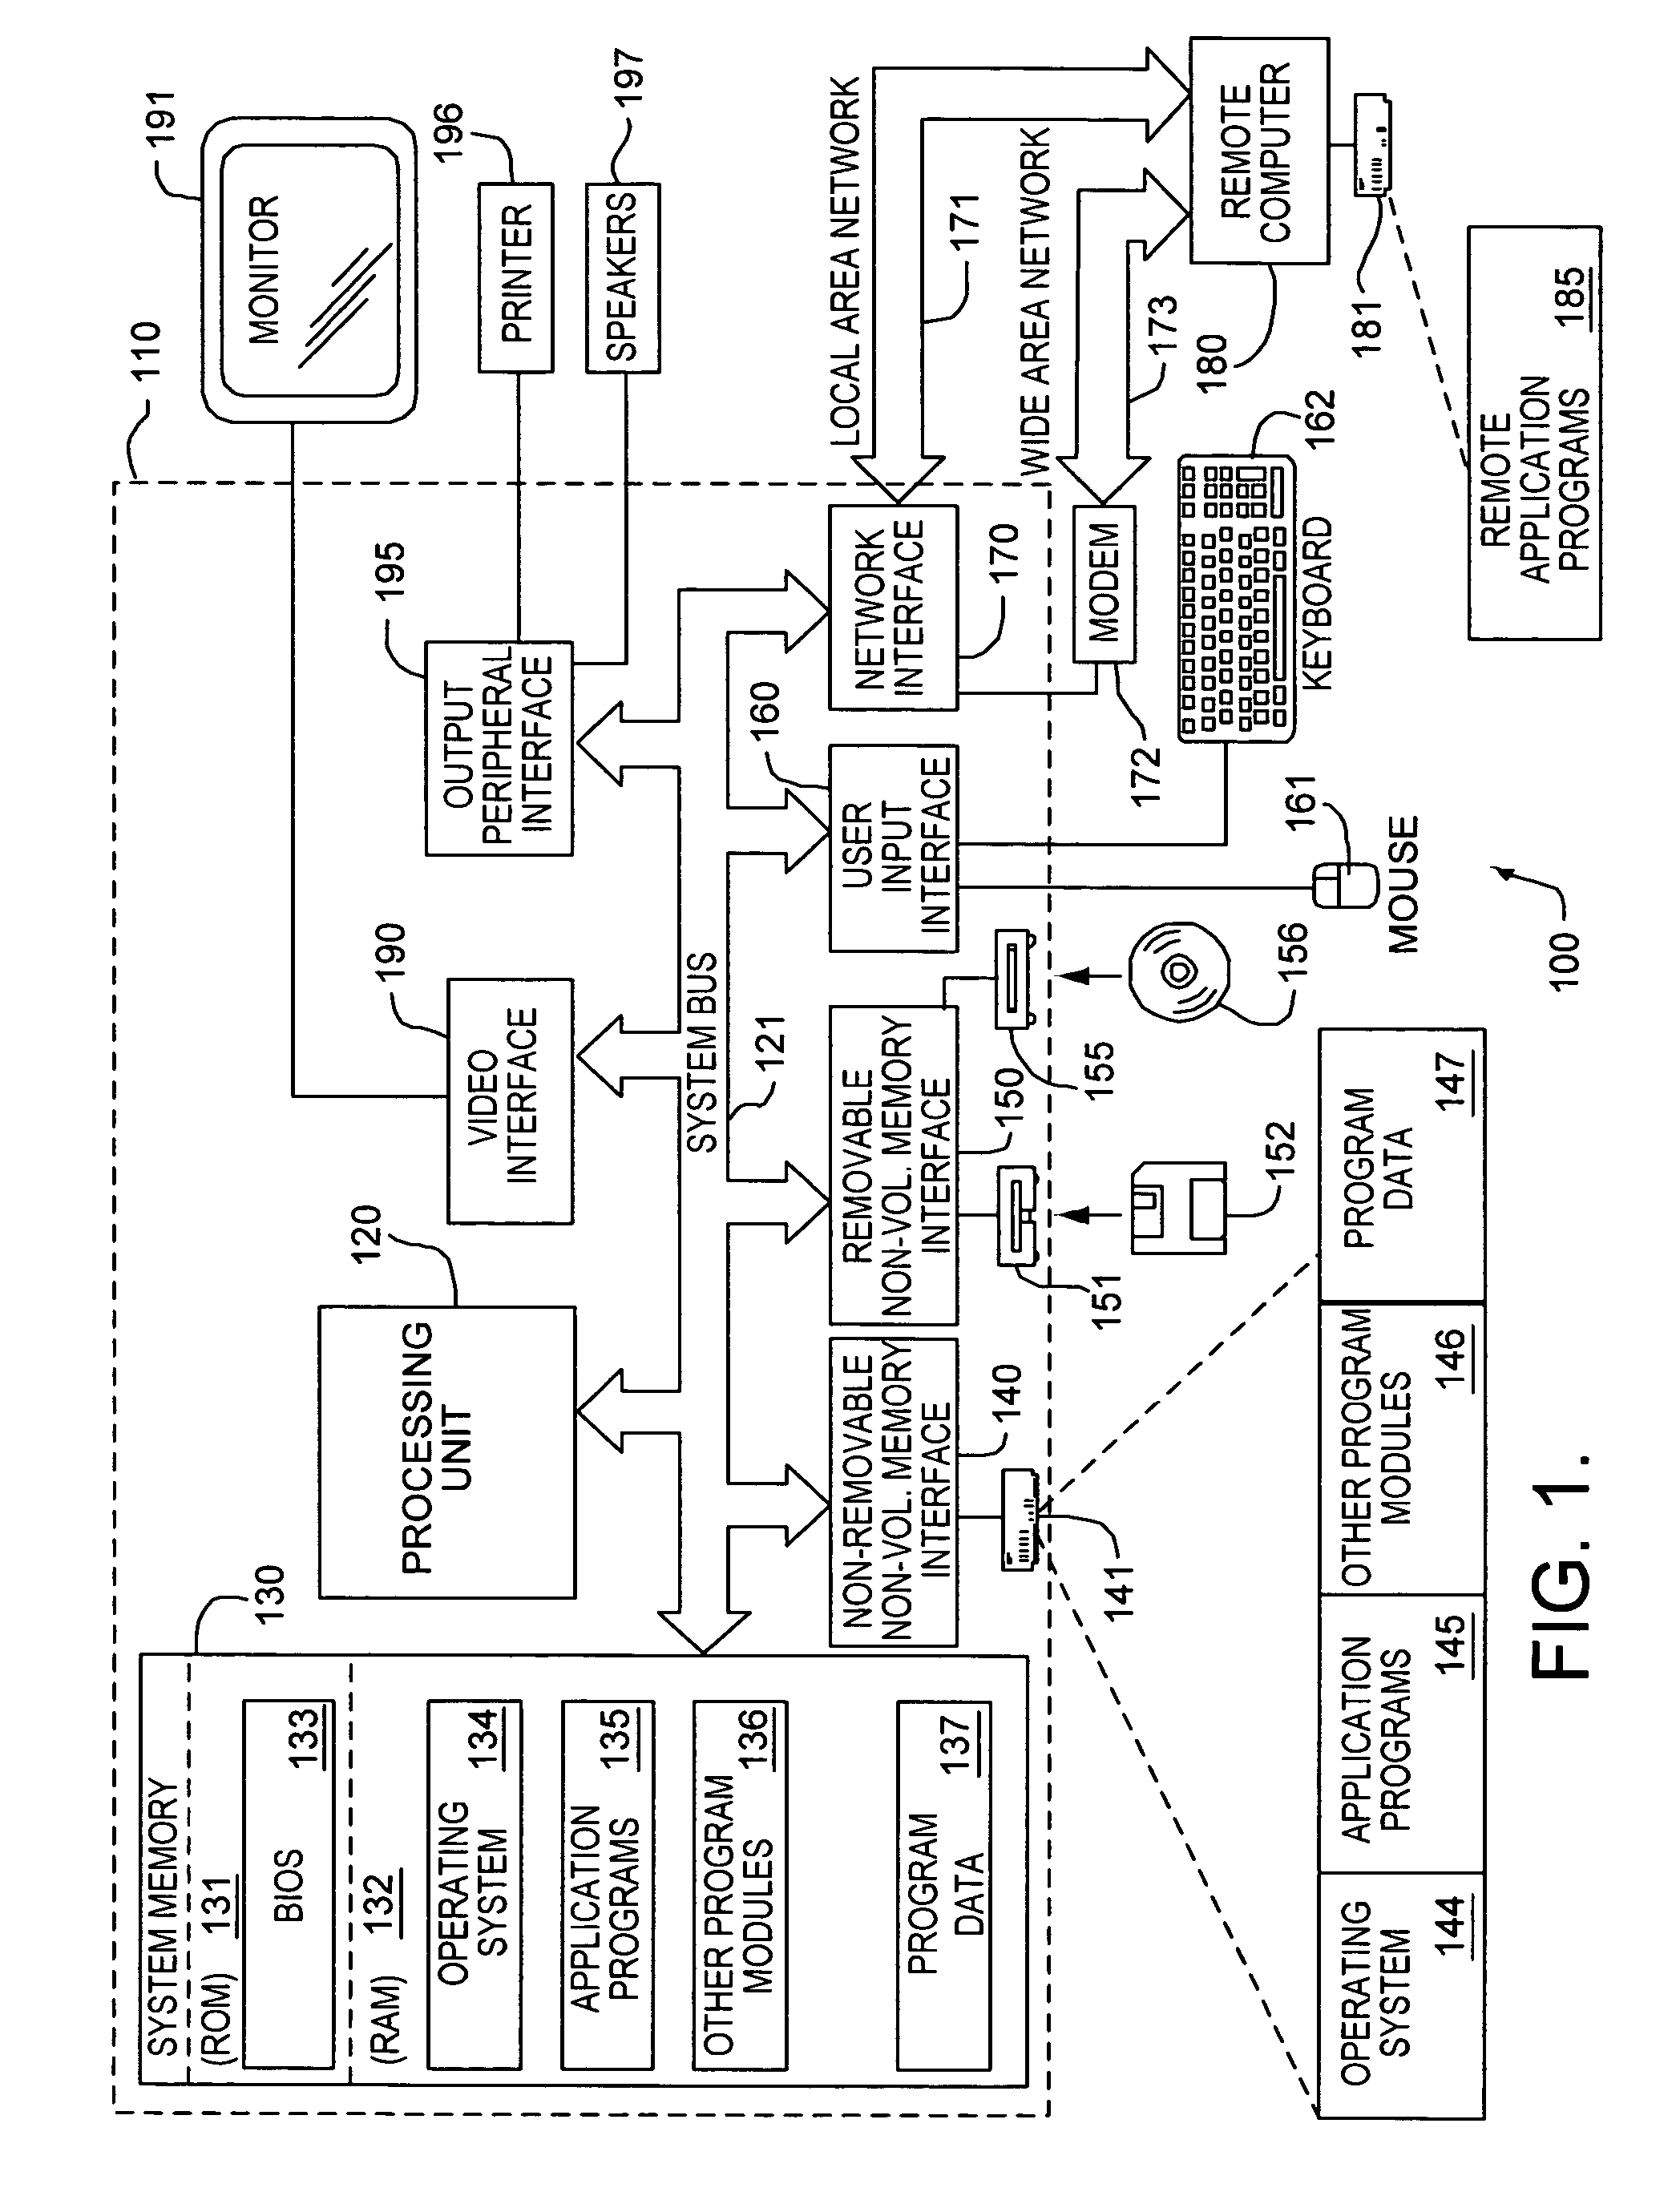 System and method for utilizing the content of audio/video files to select advertising content for display